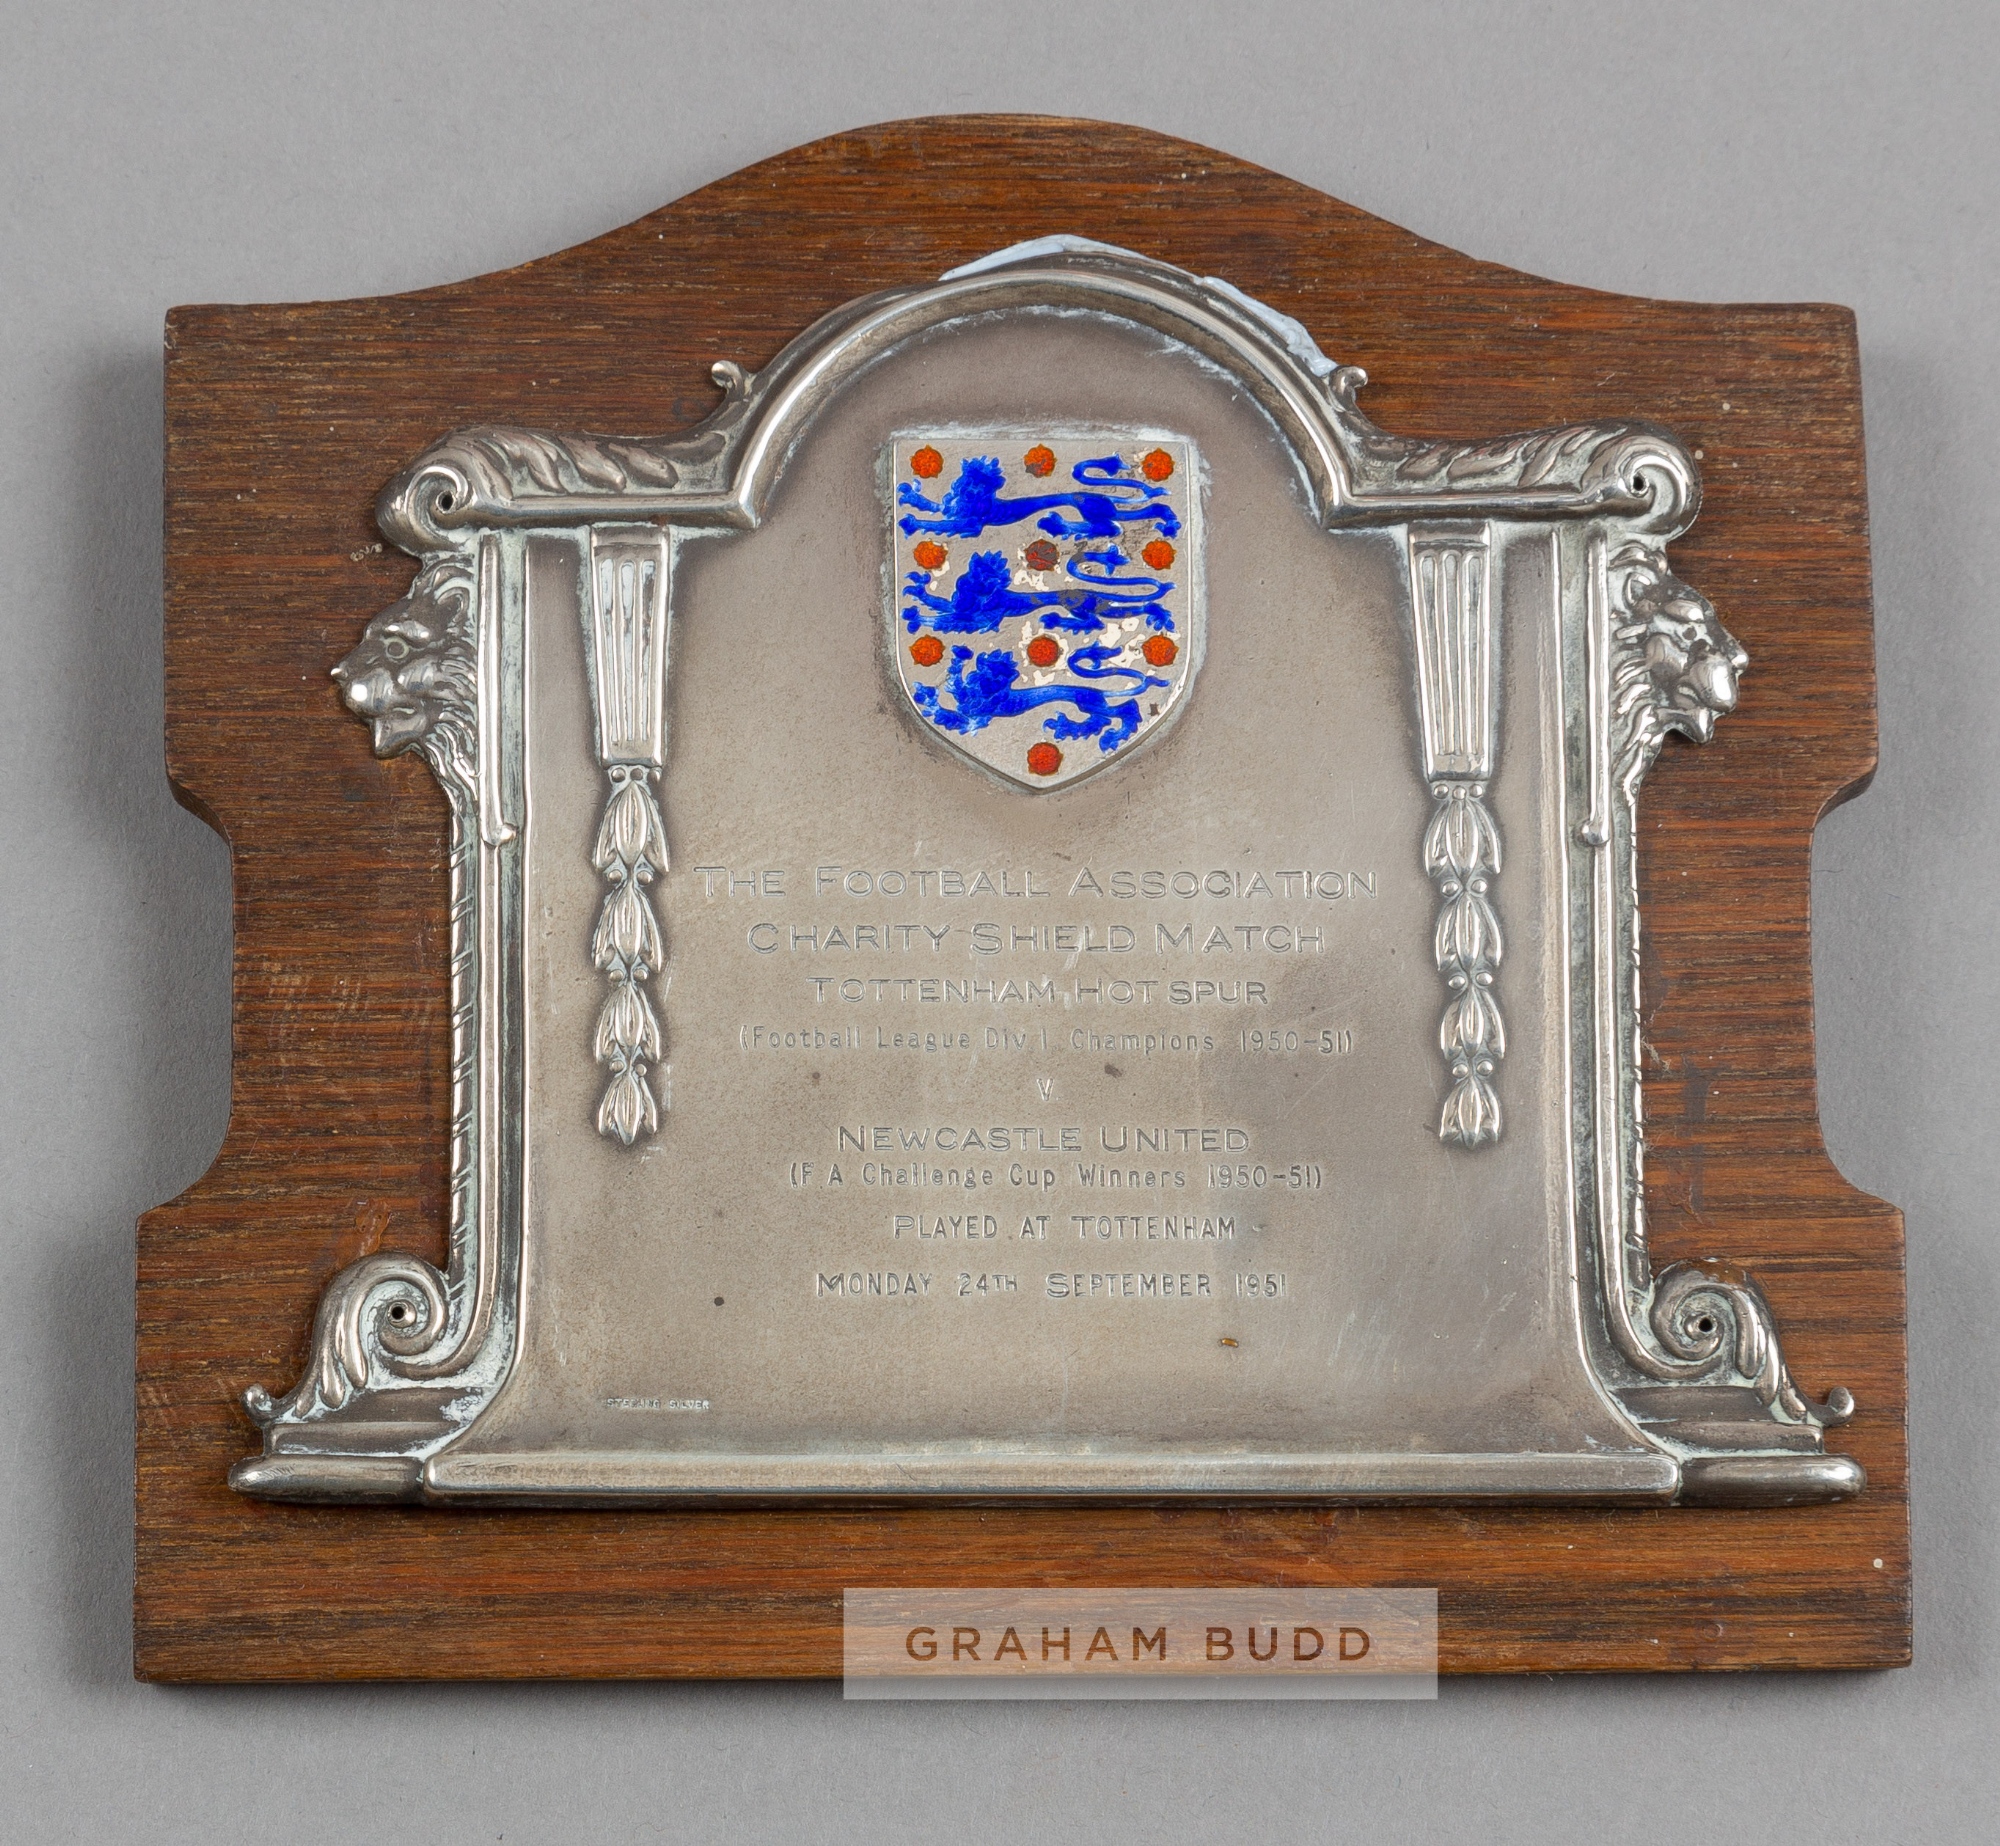 George Robledo's F.A. Charity Shield trophy award Tottenham Hotspur v Newcastle United, played at